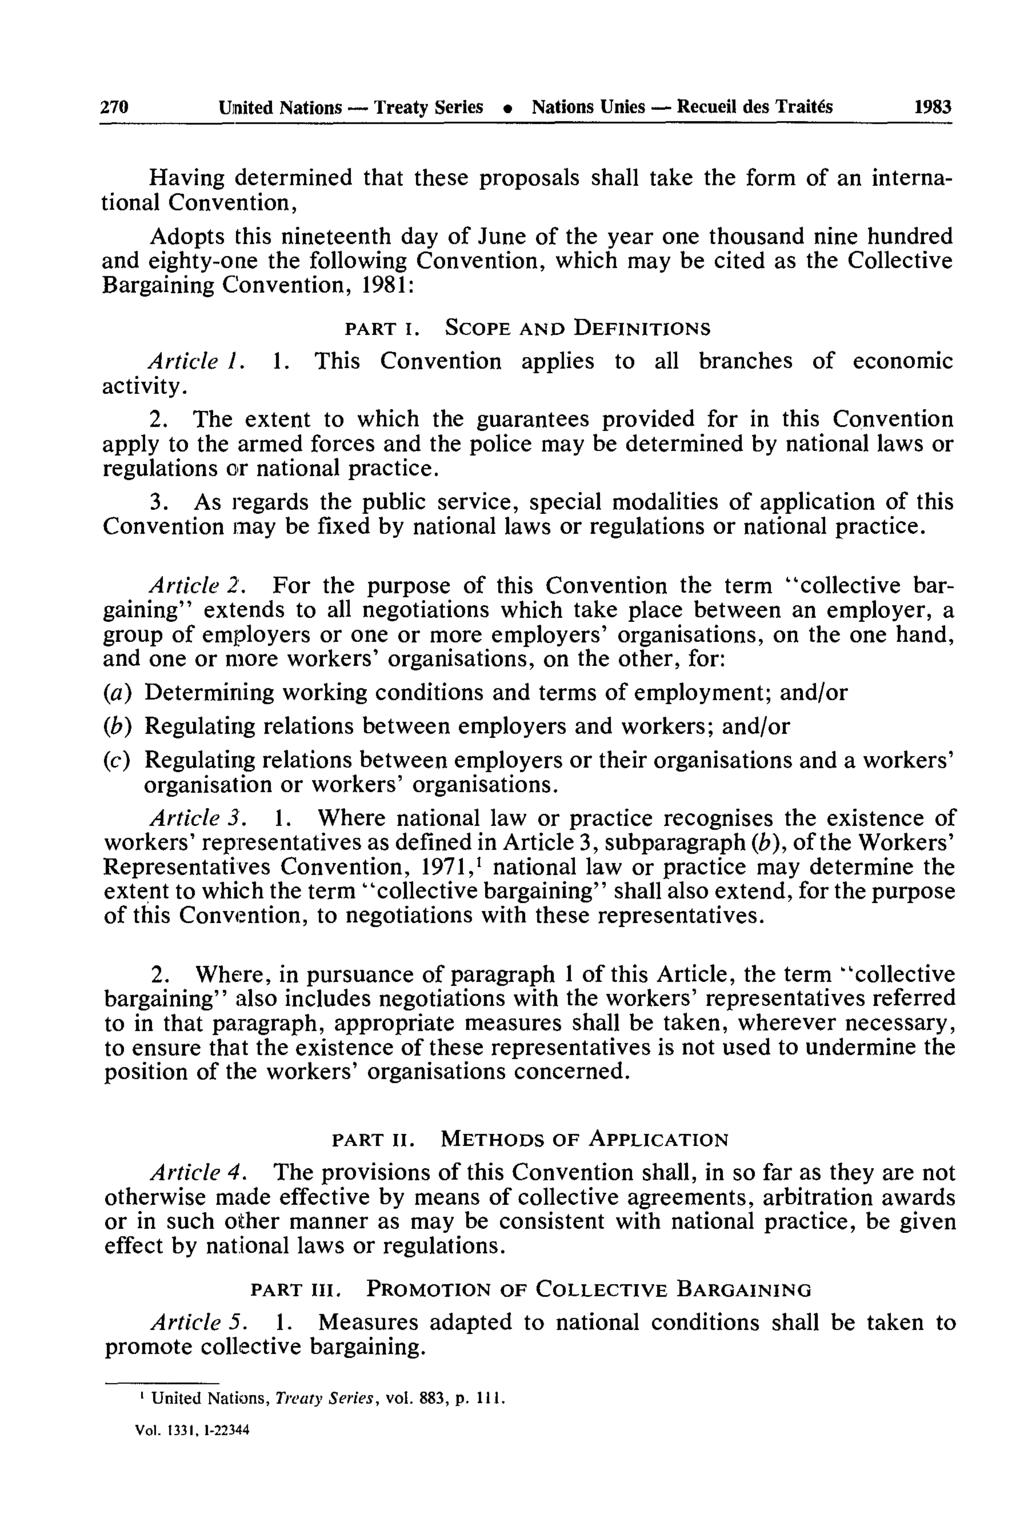 270 United Nations Treaty Series Nations Unies Recueil des Traités 1983 Having determined that these proposals shall take the form of an interna tional Convention, Adopts this nineteenth day of June